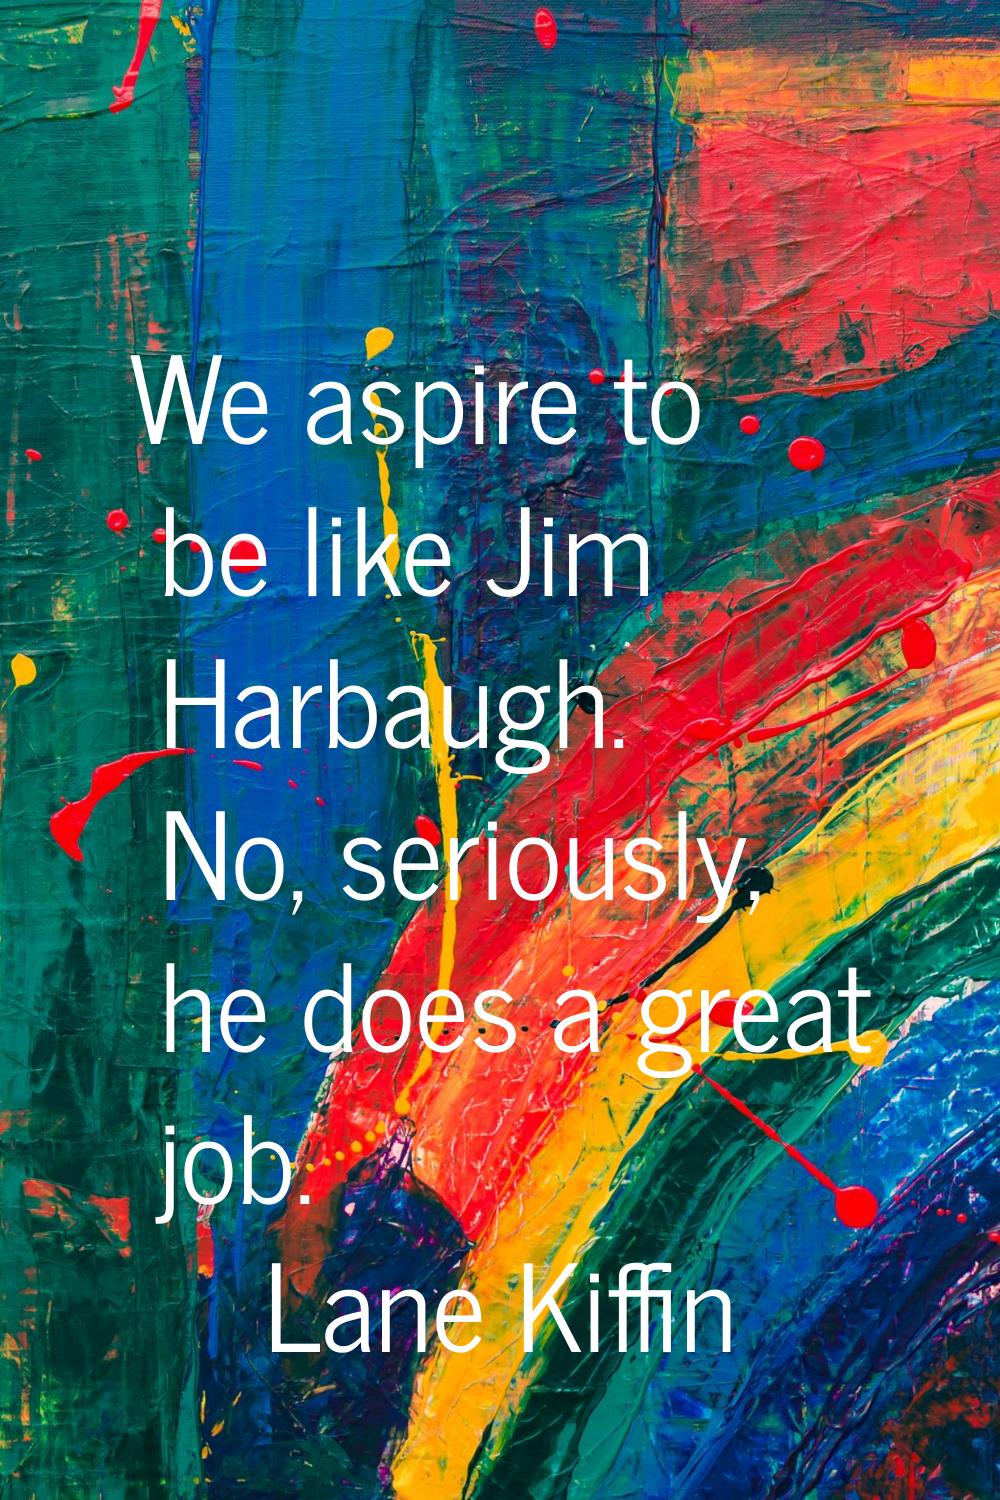 We aspire to be like Jim Harbaugh. No, seriously, he does a great job.